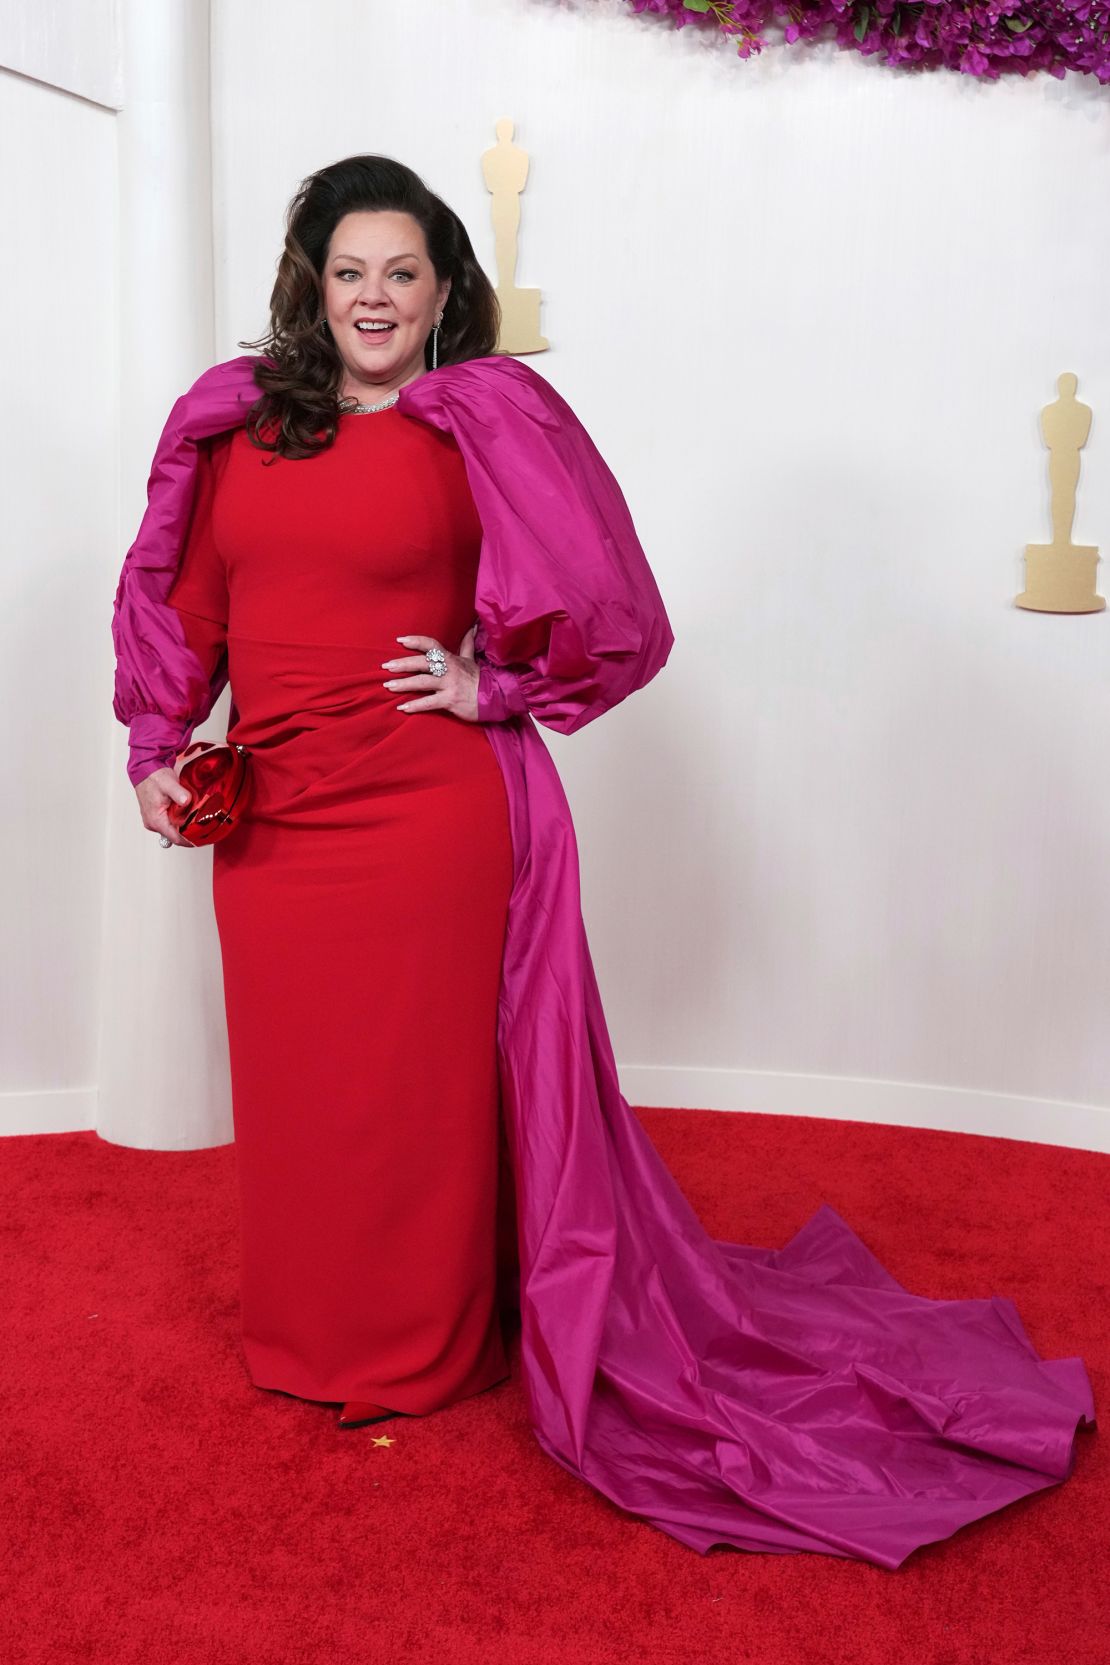 Melissa McCarthy channeled Old Hollywood glamour in a red Christian Siriano gown with magenta sleeves. The actor accessorized with Dena Kemp jewelry.